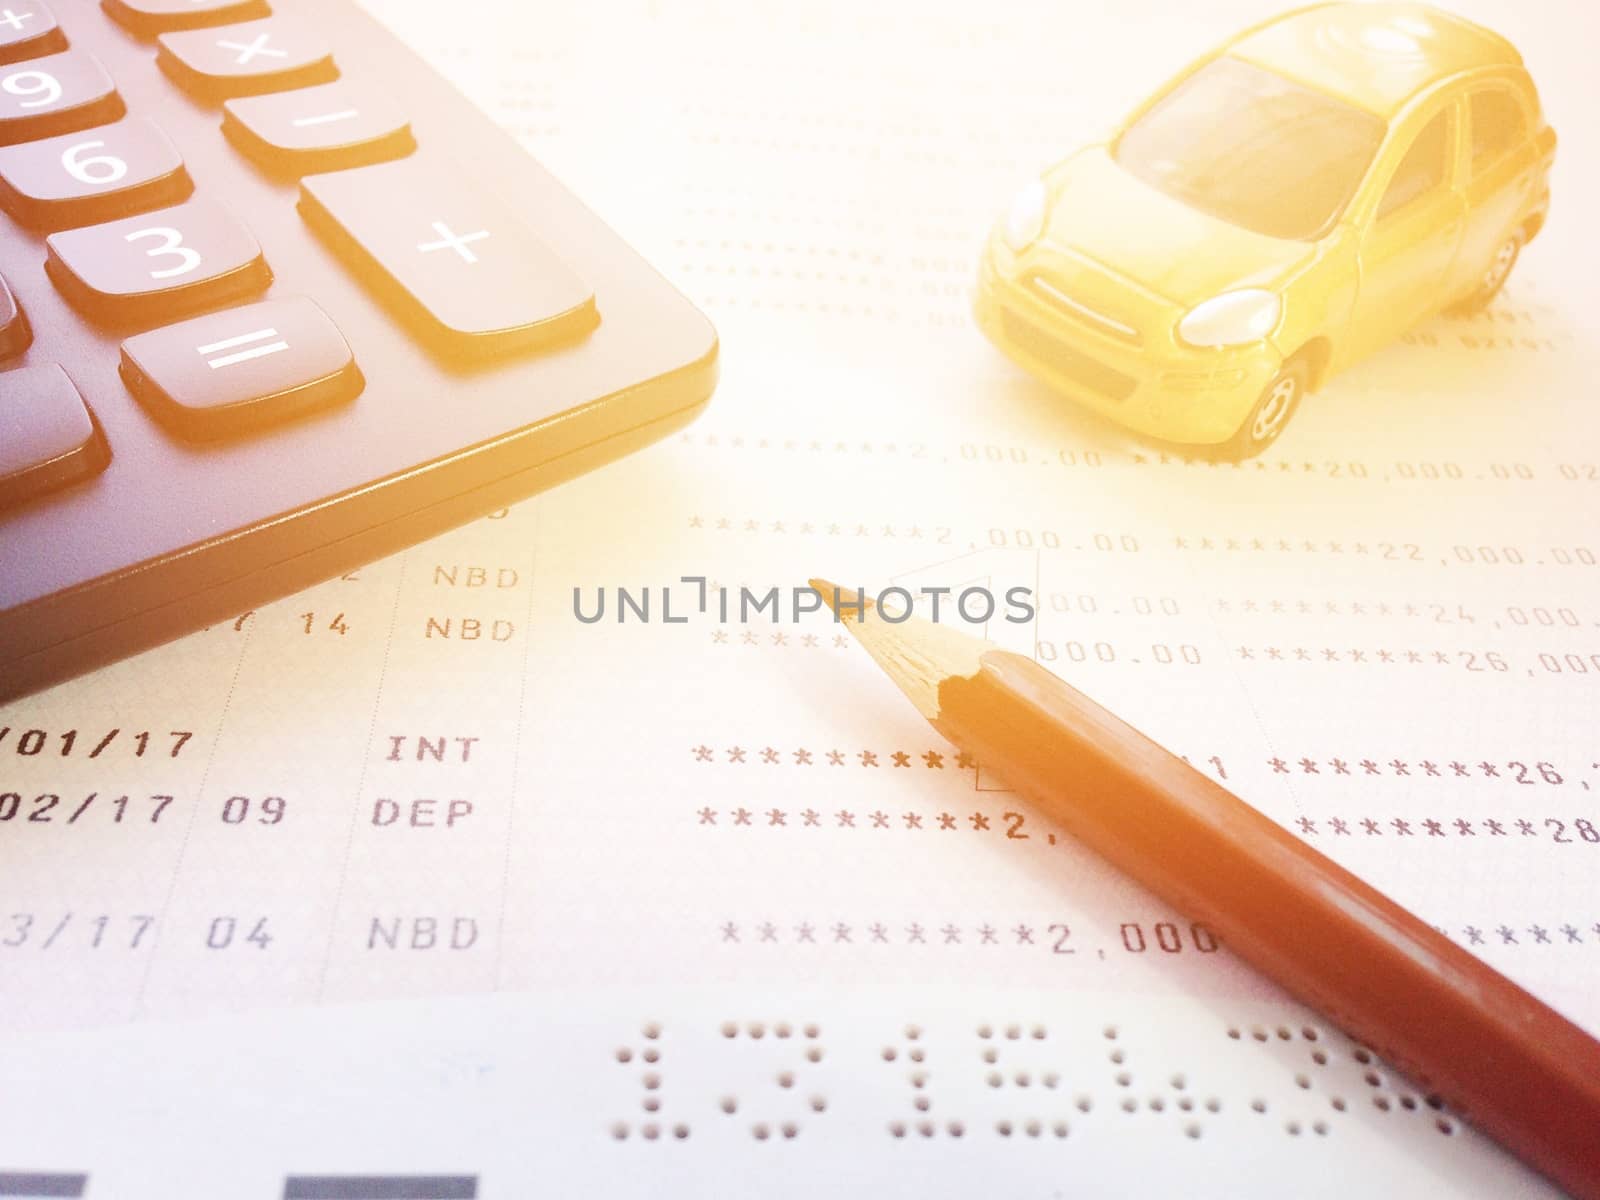 Business, finance, savings, banking or car loan concept : Miniature car model, pencil, calculator and savings account passbook or financial statement on white background